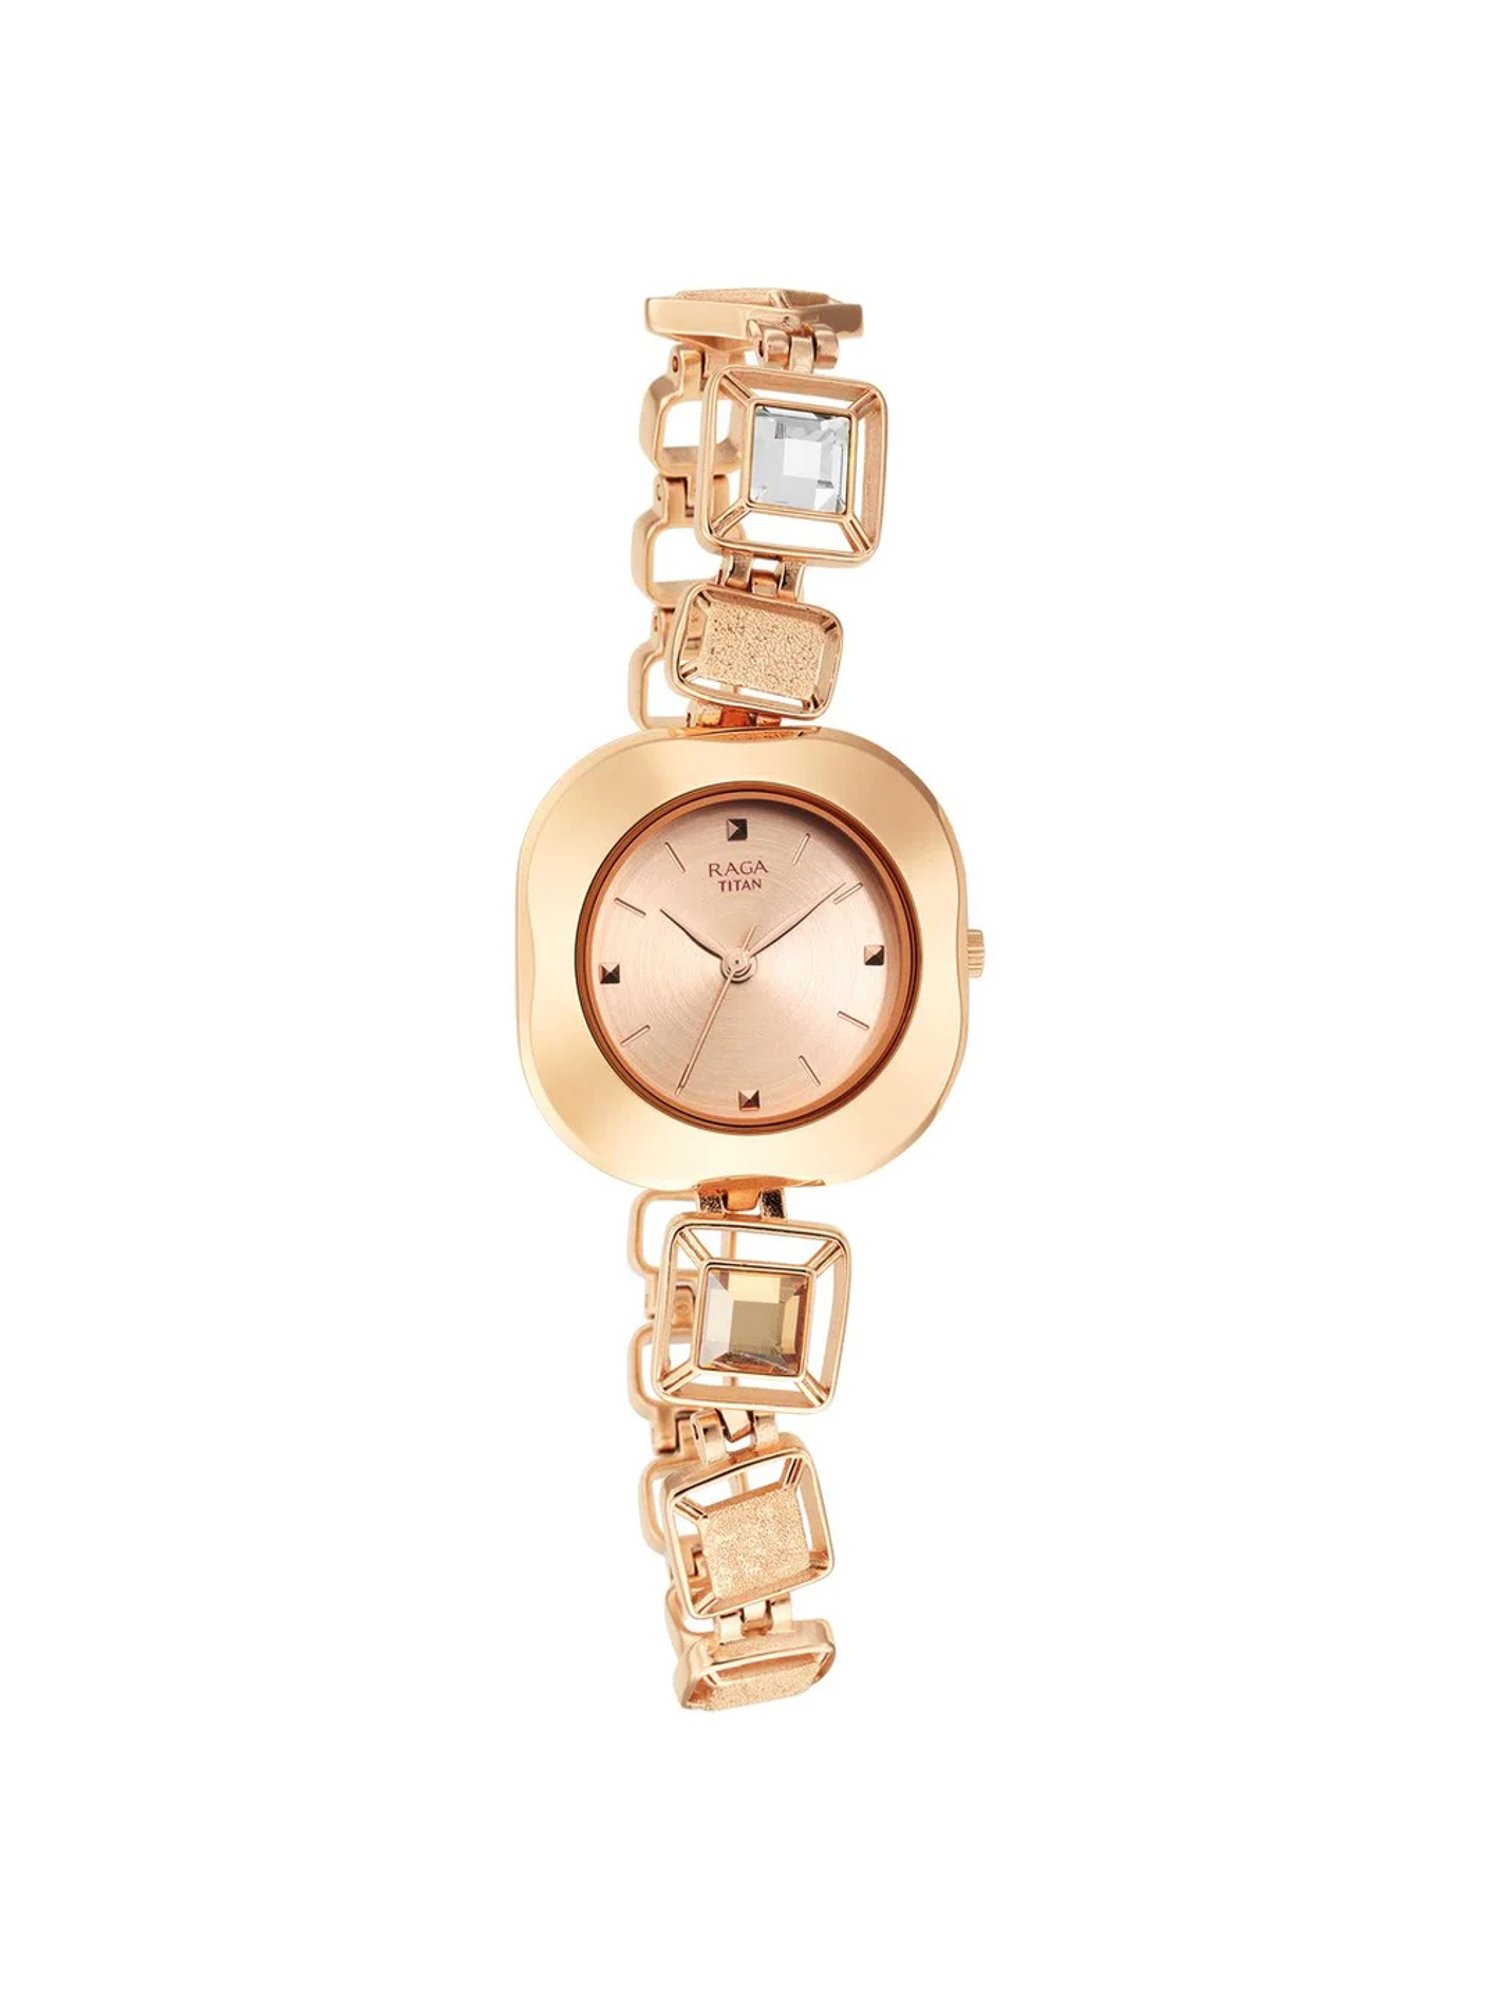 Buy Online Titan Raga Cocktails Mother of Pearl Dial Analogue Metal Strap  Watch for Women - nr95106wm02f | Titan India | Pretty watches, Womens  watches luxury, Fashion watches